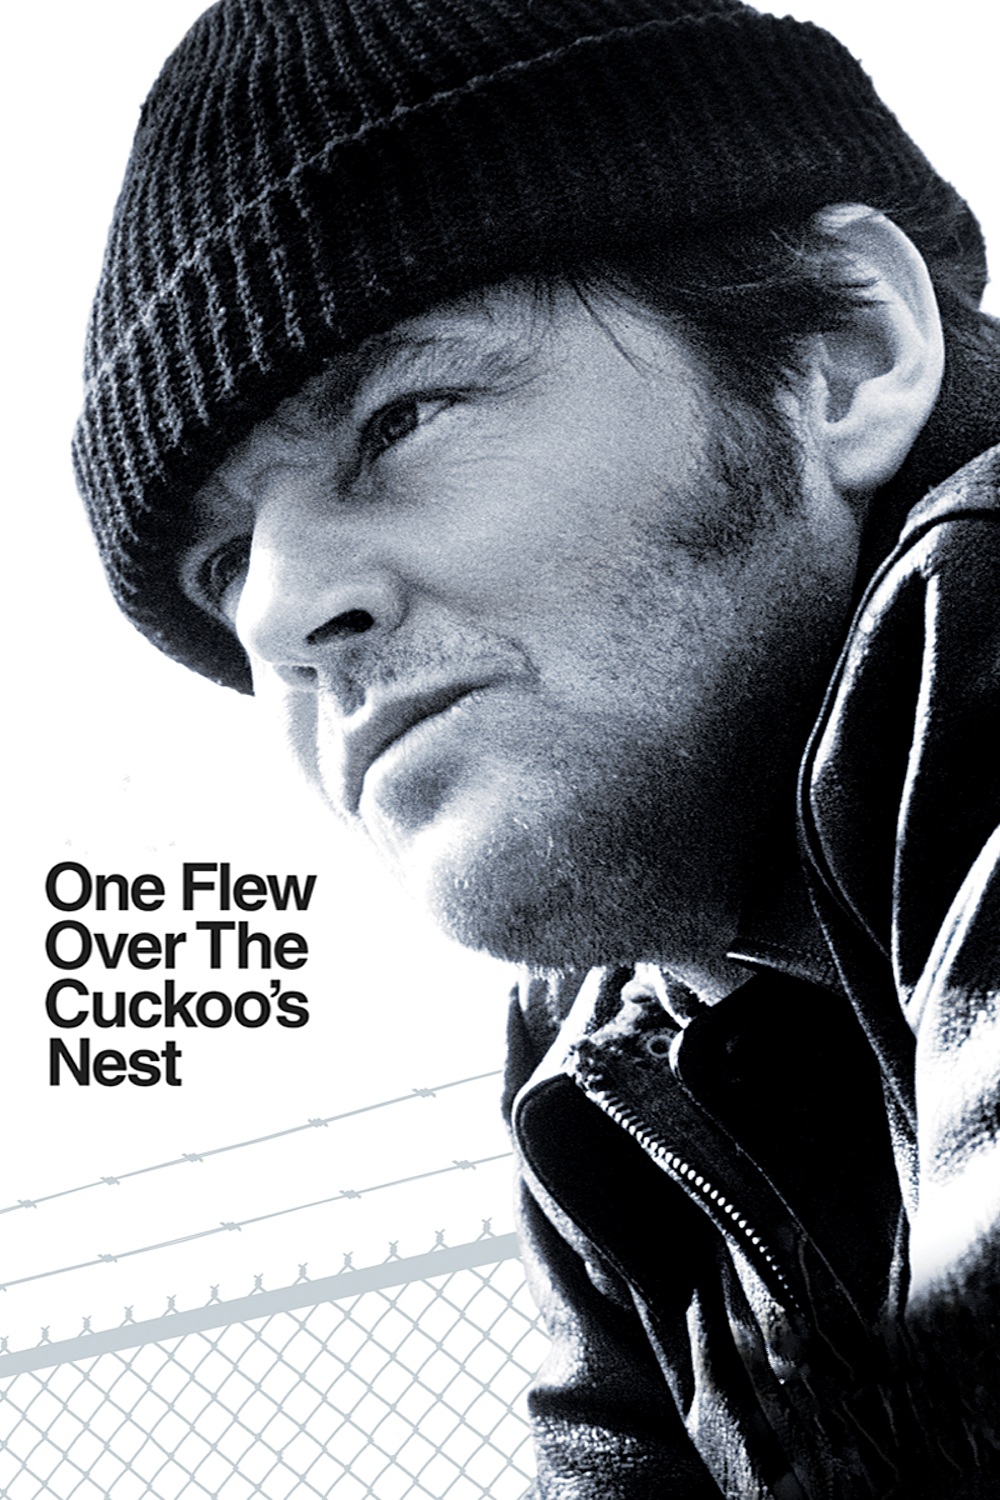 Dementia 13 + One Flew Over the Cuckoo’s Nest | Double Feature